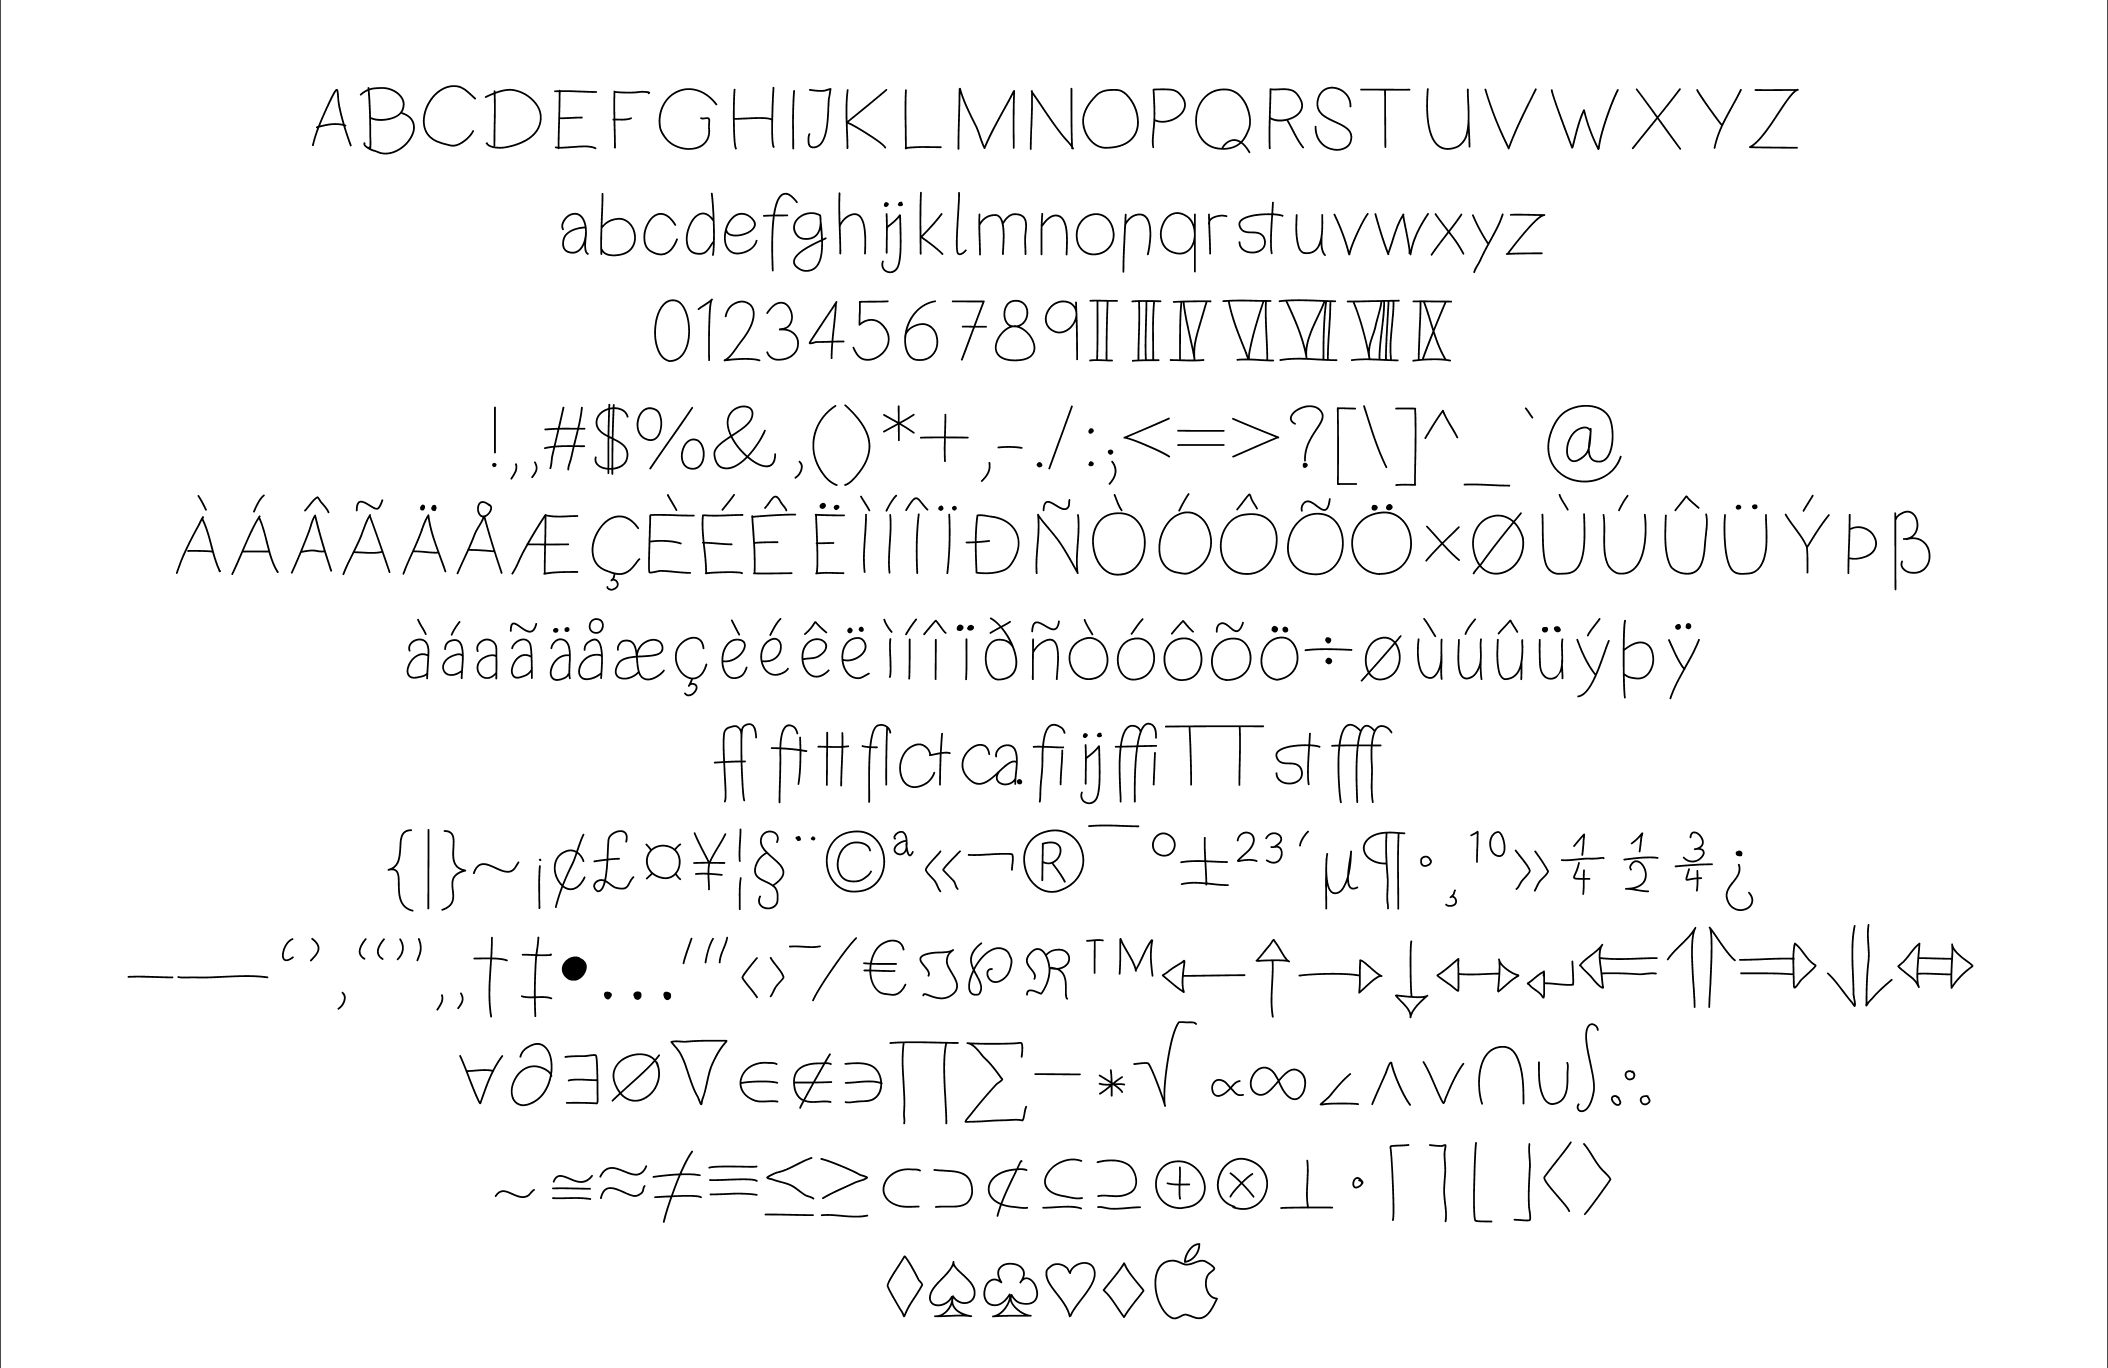 A preview of the characterset of "Shanksy", a font by Conrad Dreyer